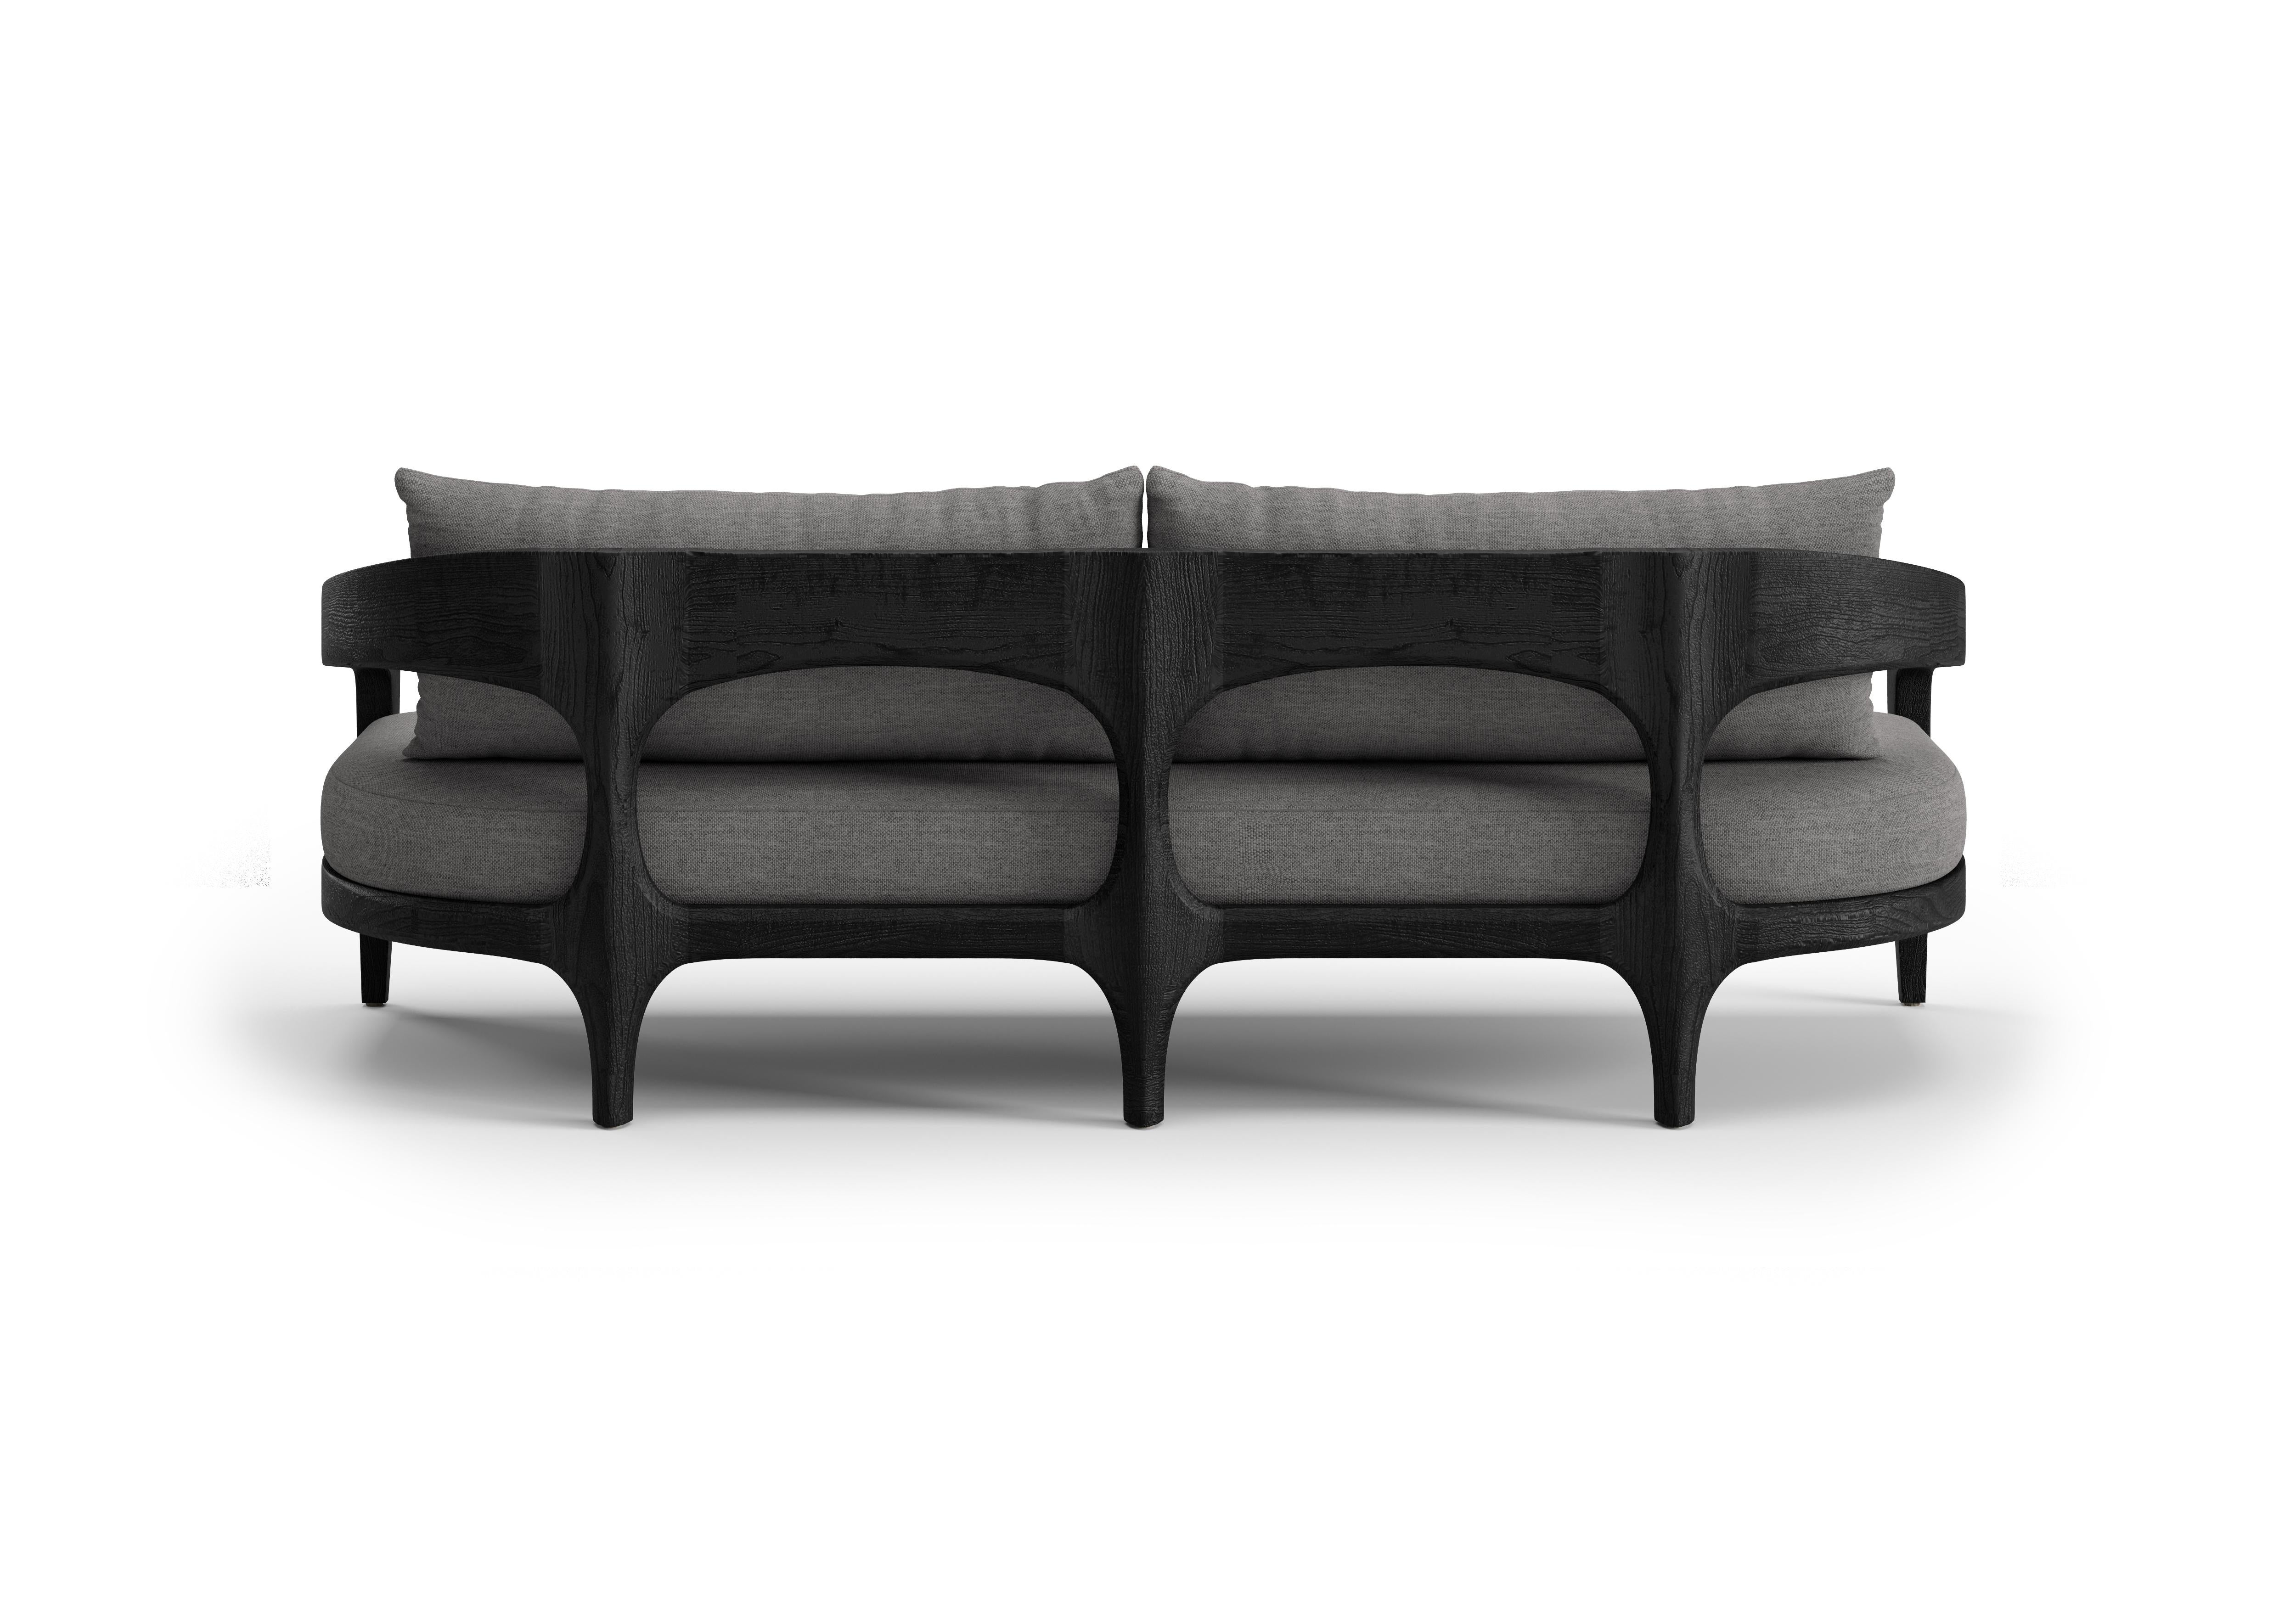 Hand-Crafted Whale-noche Outdoor 3 Seater Sofa by SNOC For Sale